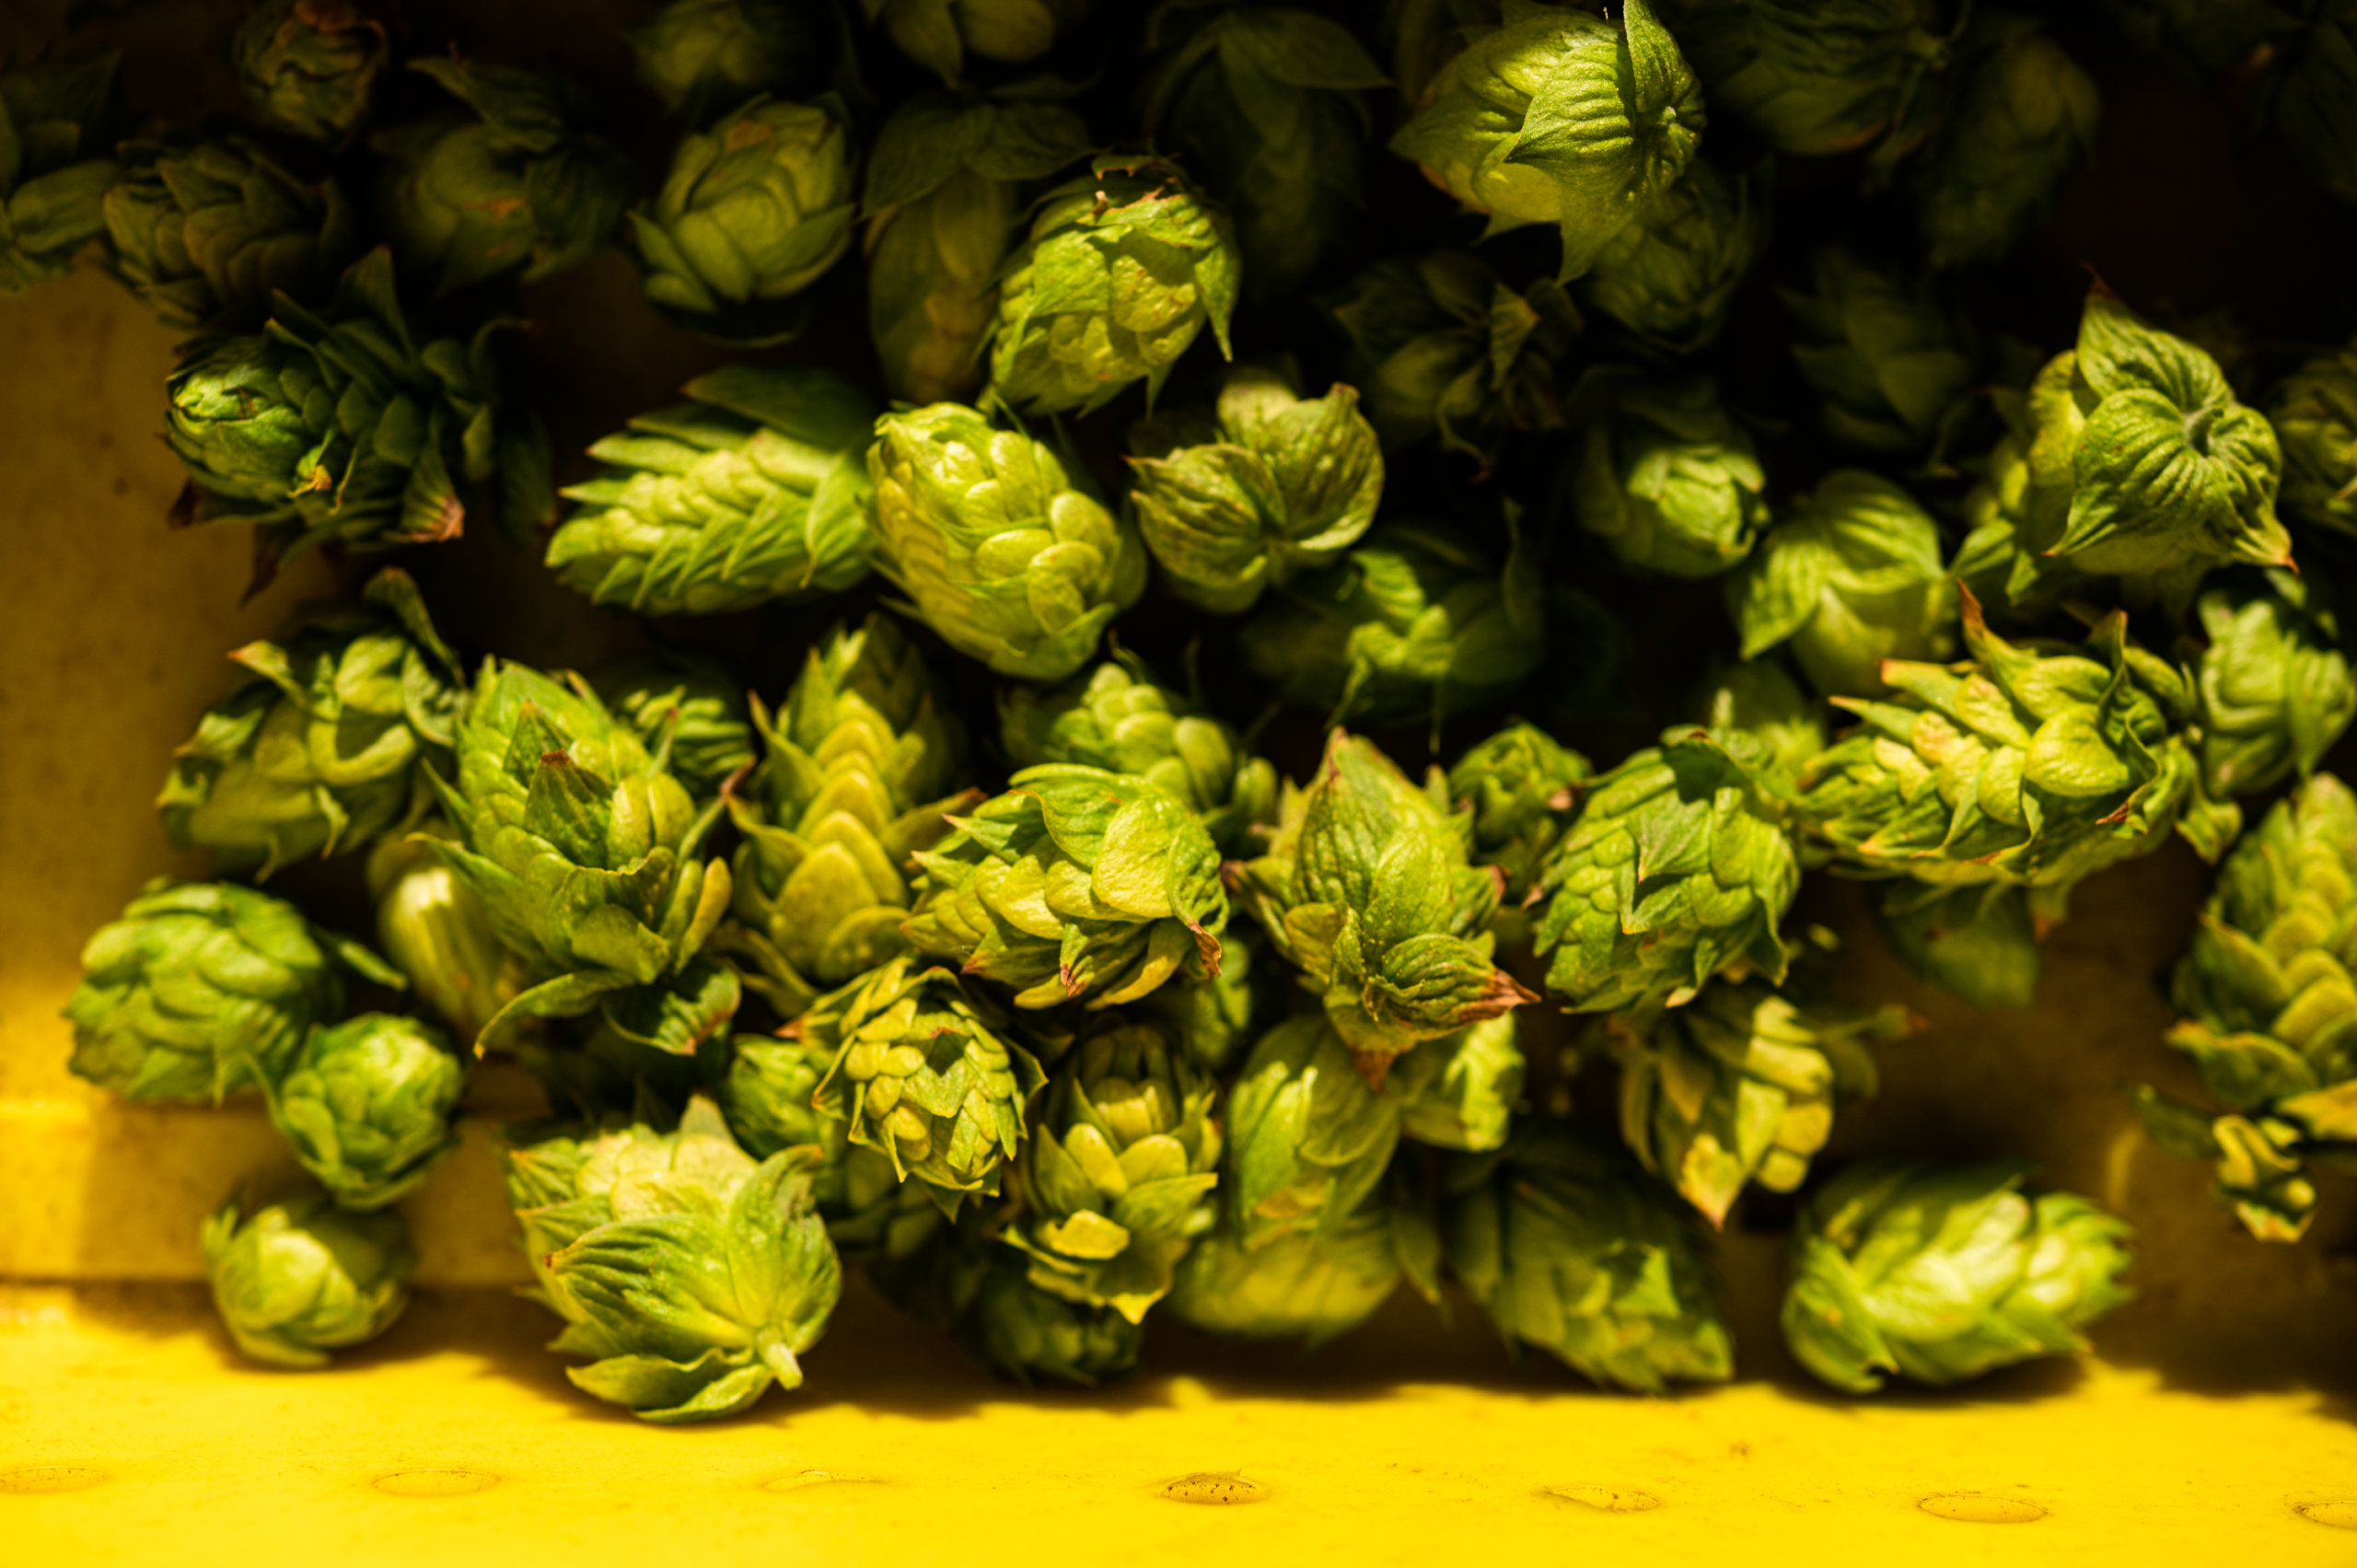 Hop cones piled in a bin after being separated from their bines